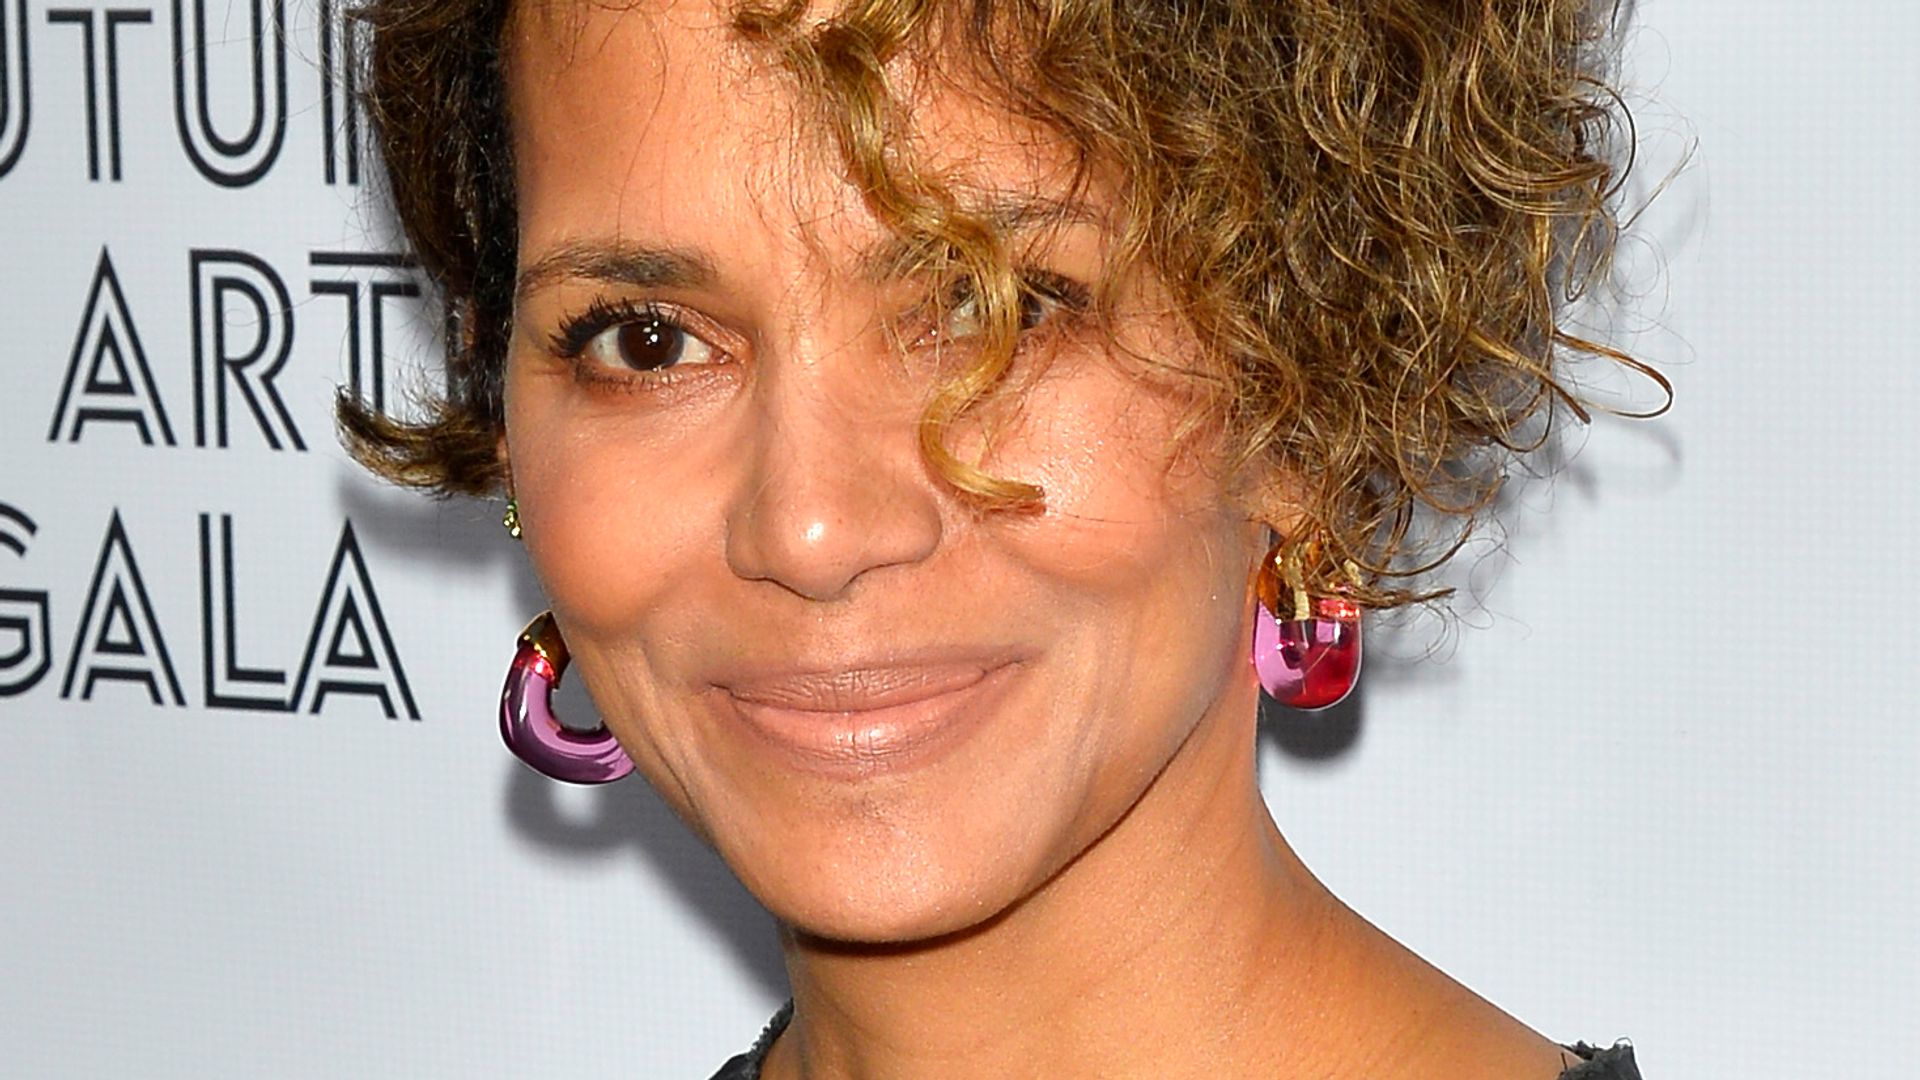 Halle Berry smiling at the camera